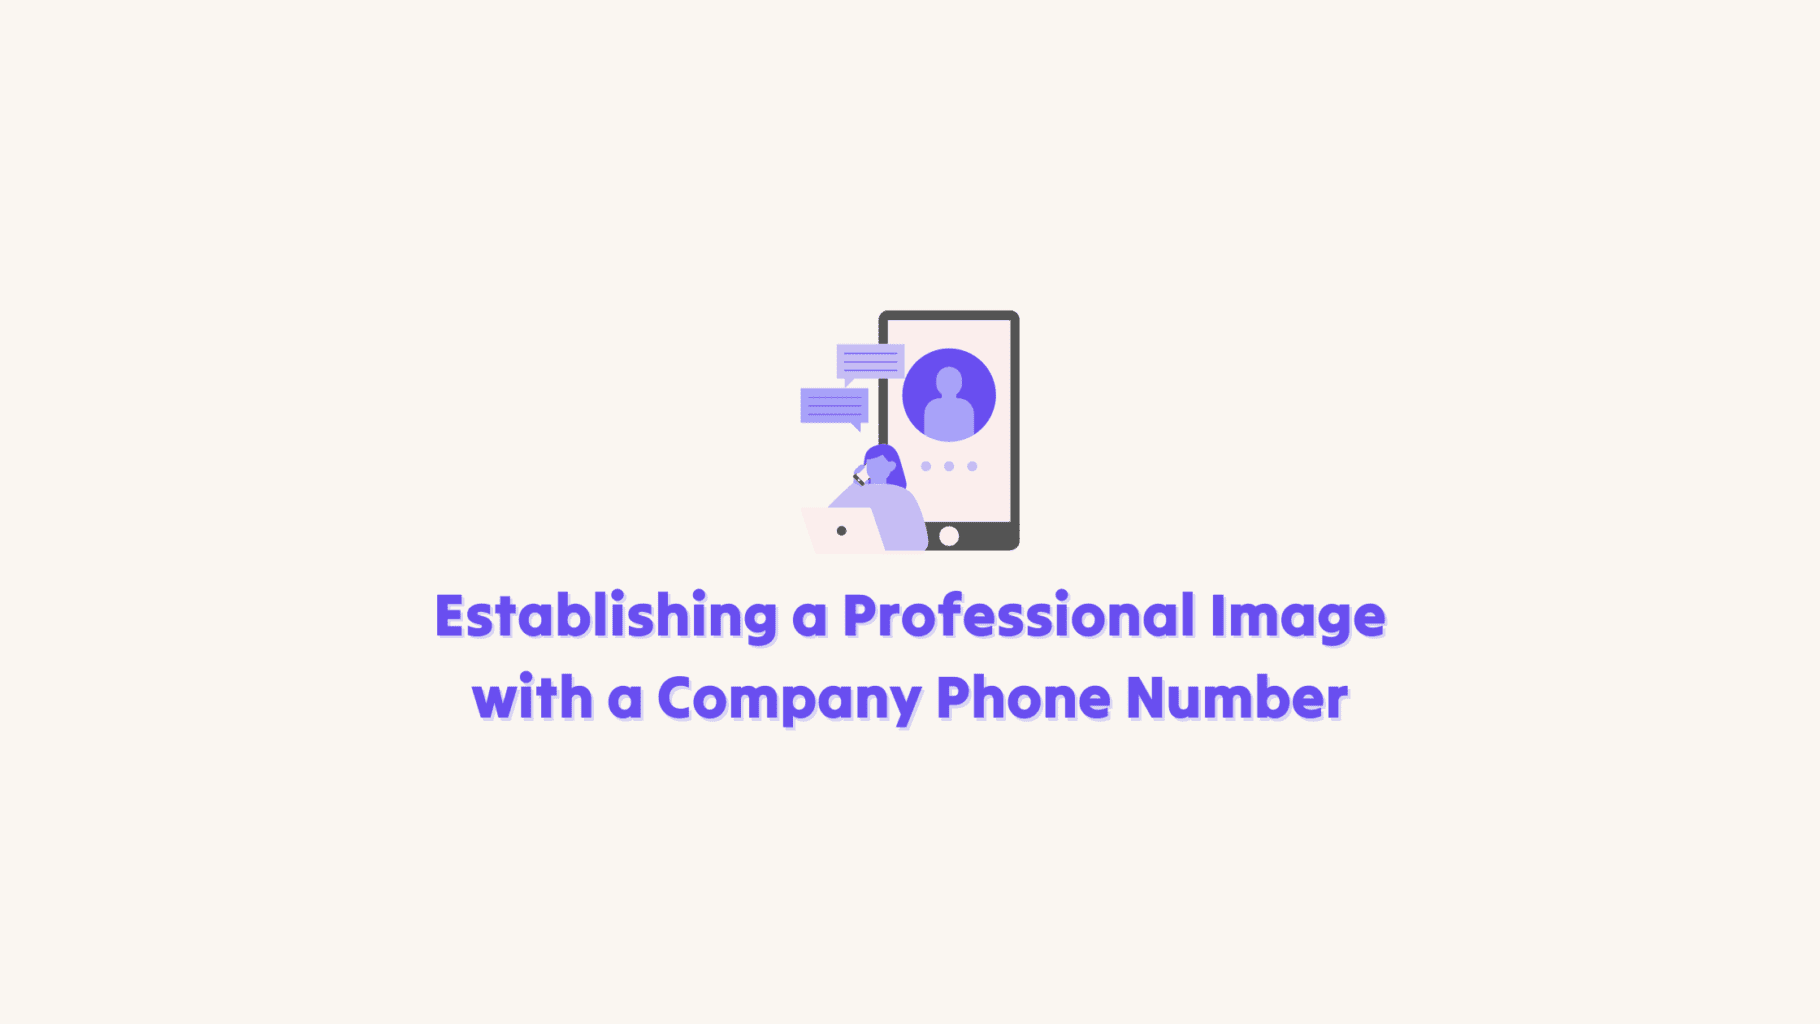 Establishing a Professional Image with a Company Phone Number